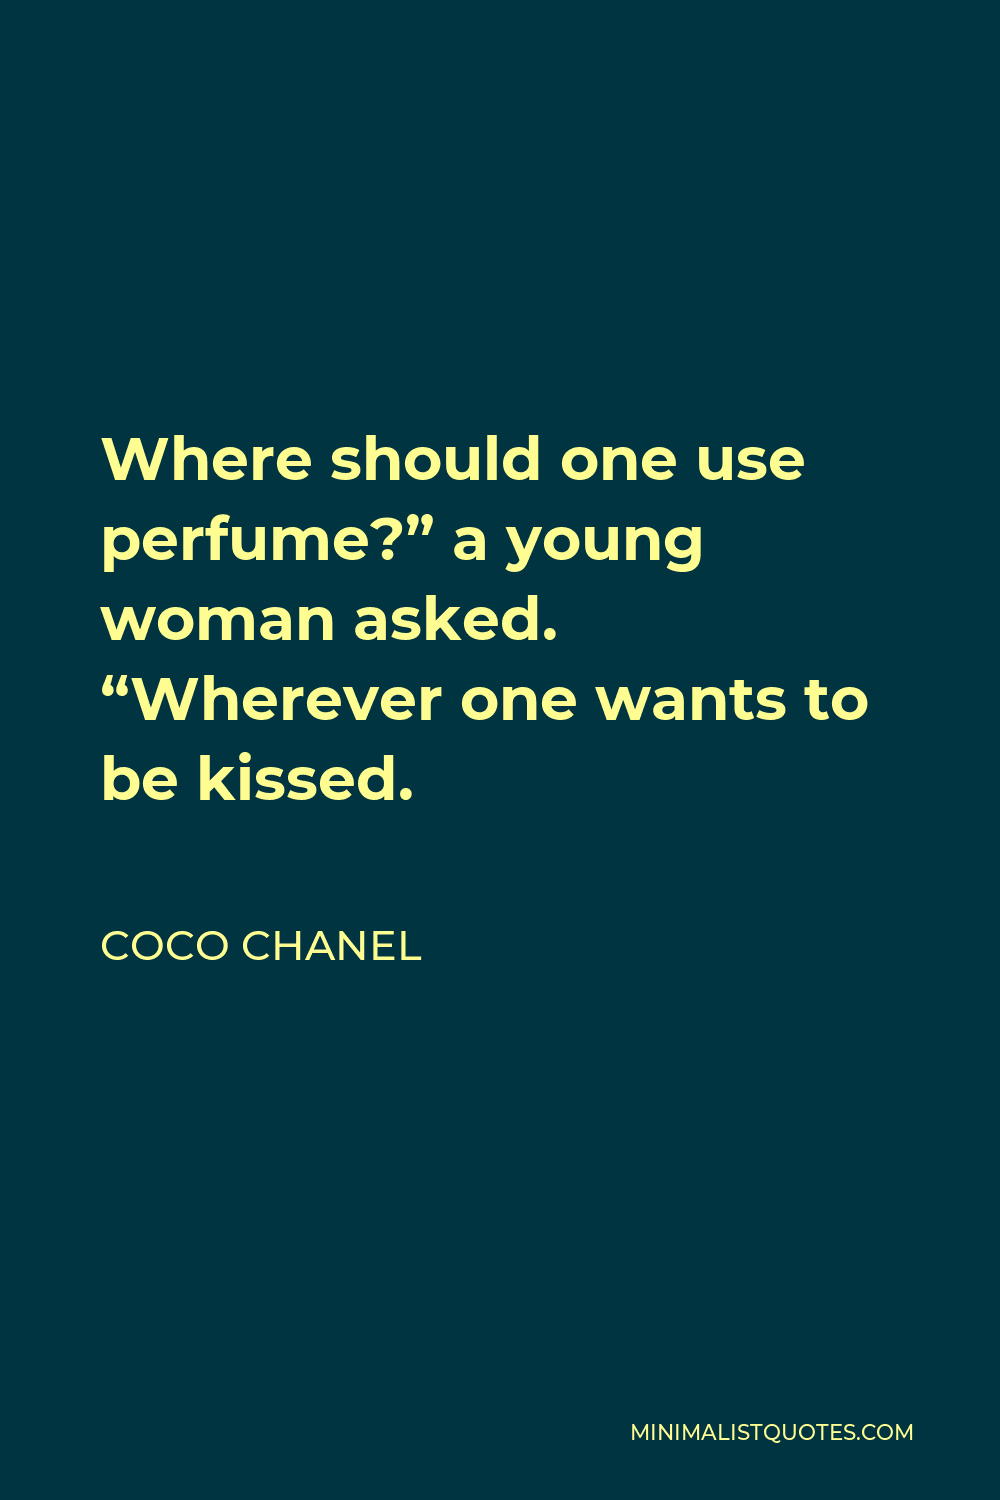 Coco Chanel Quote - Where should one use perfume?” a young woman asked. “Wherever one wants to be kissed.